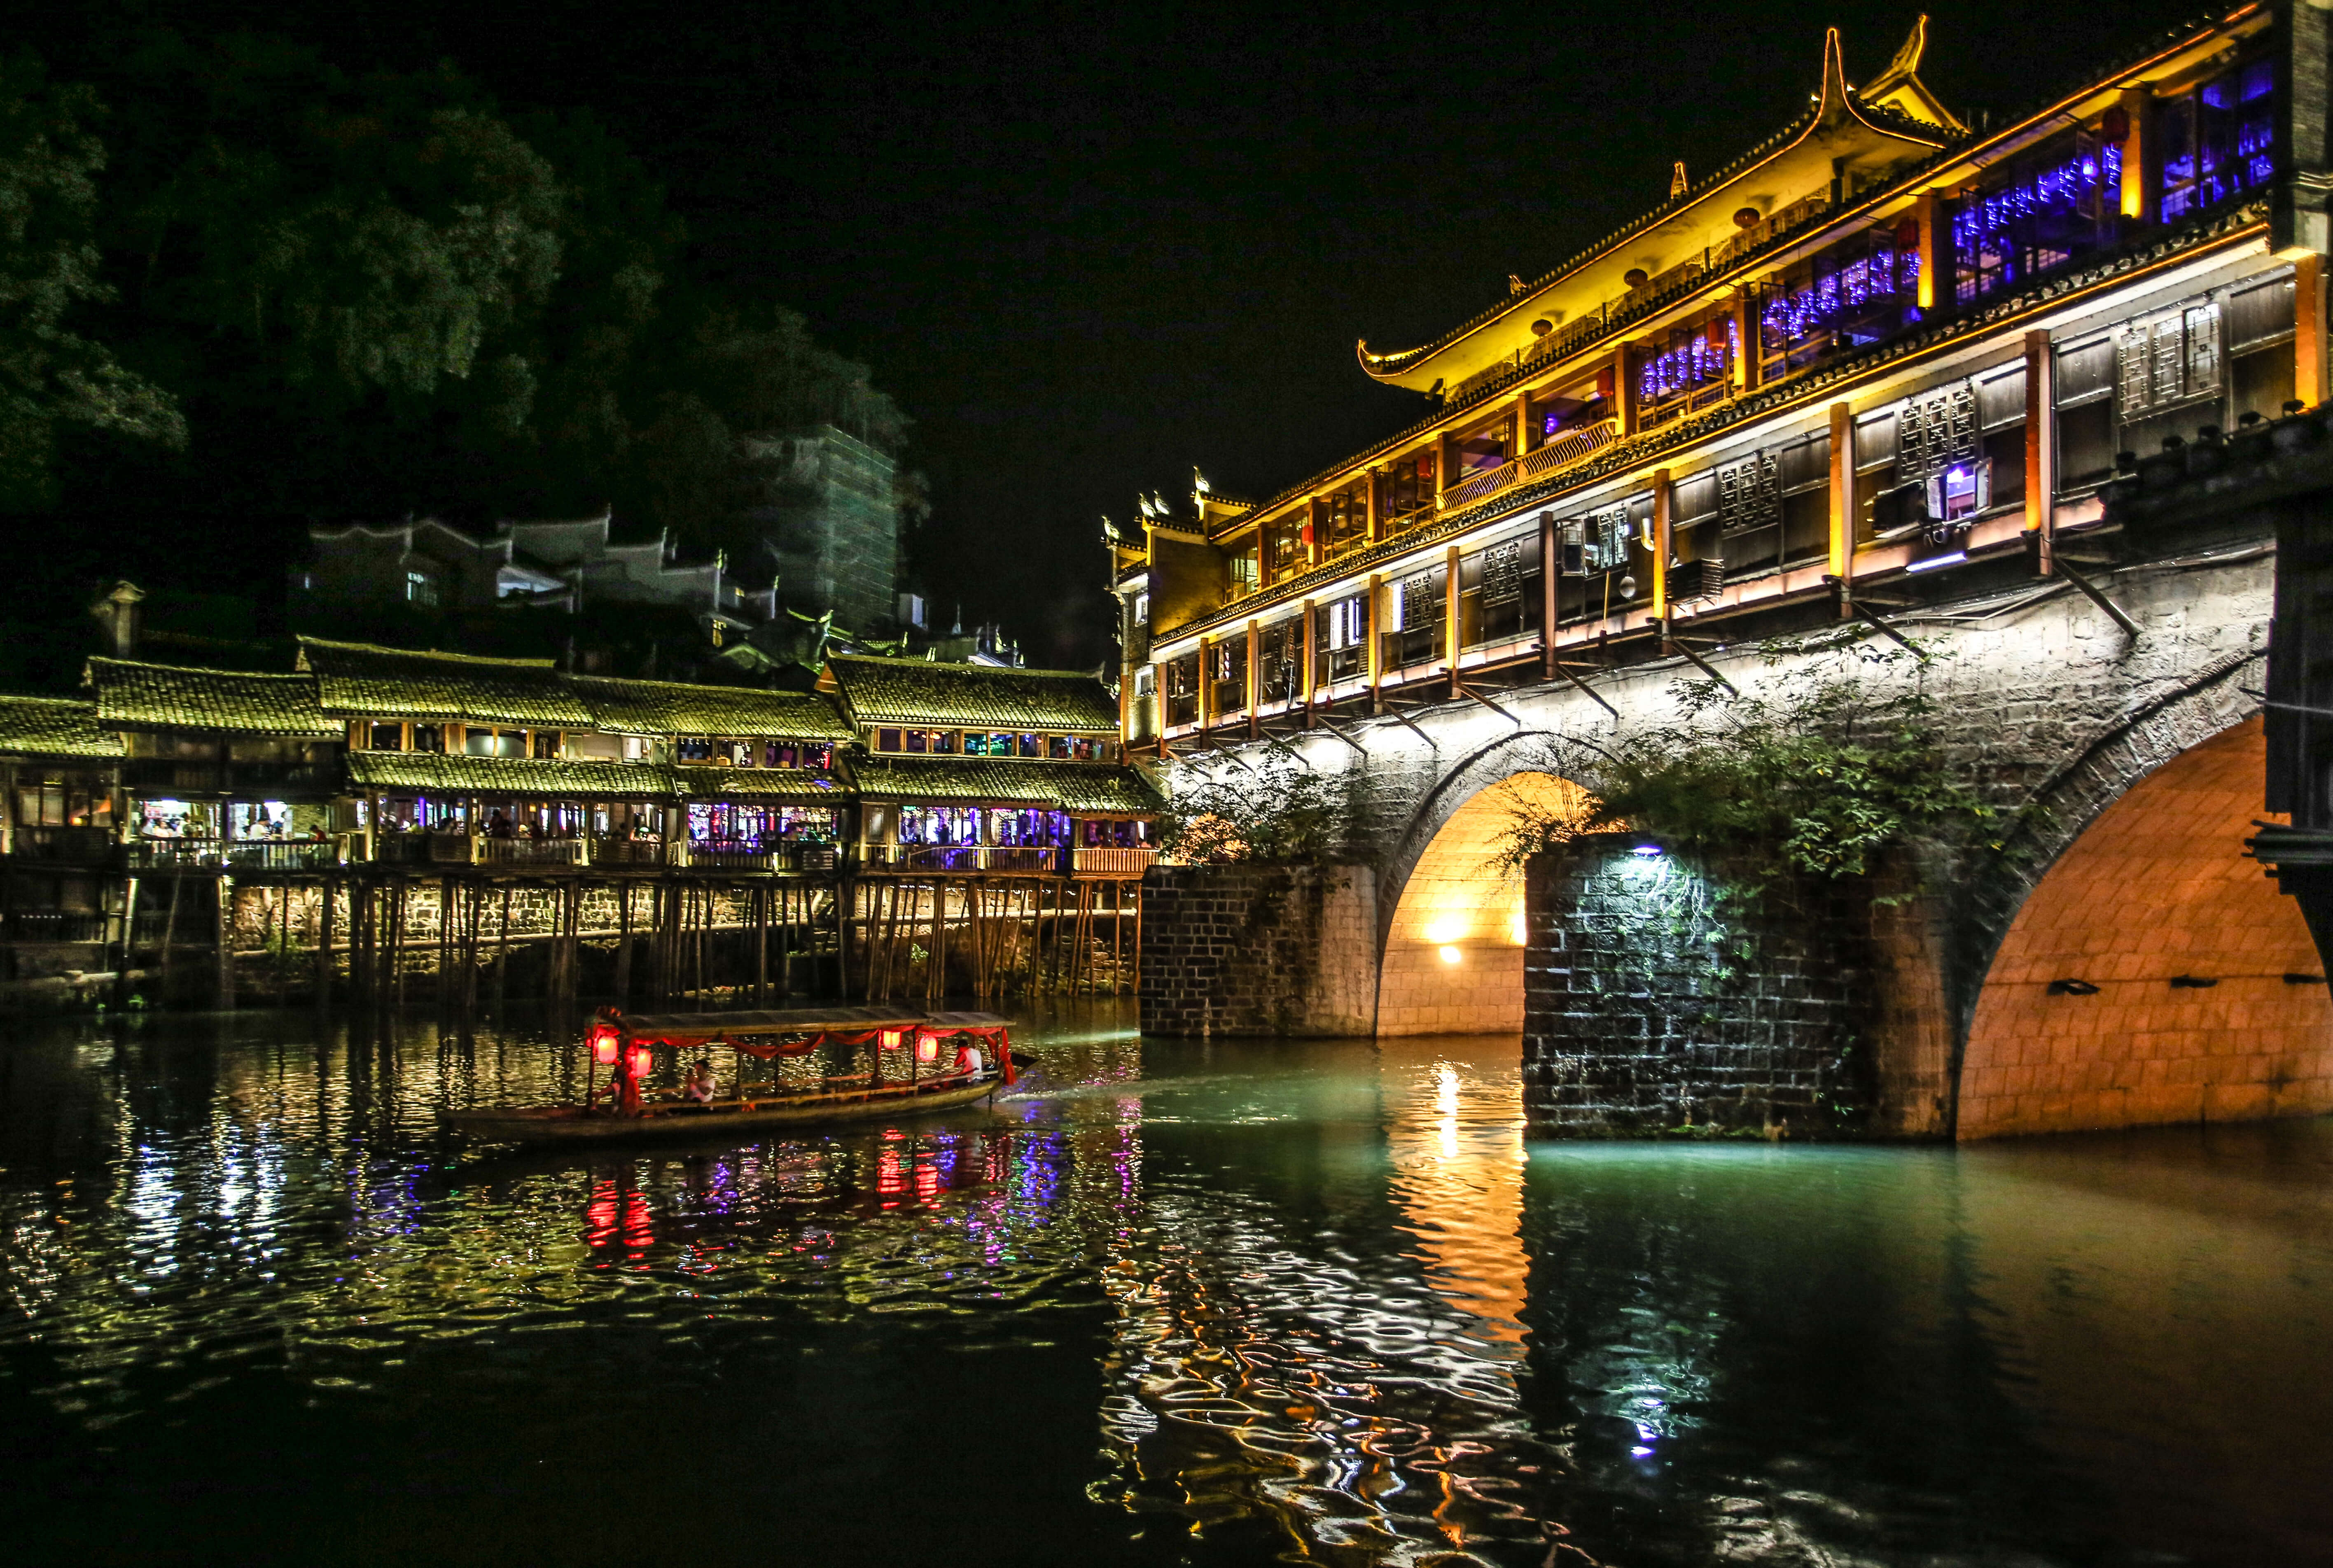 Fenghuang_Hunan_architecture on the road